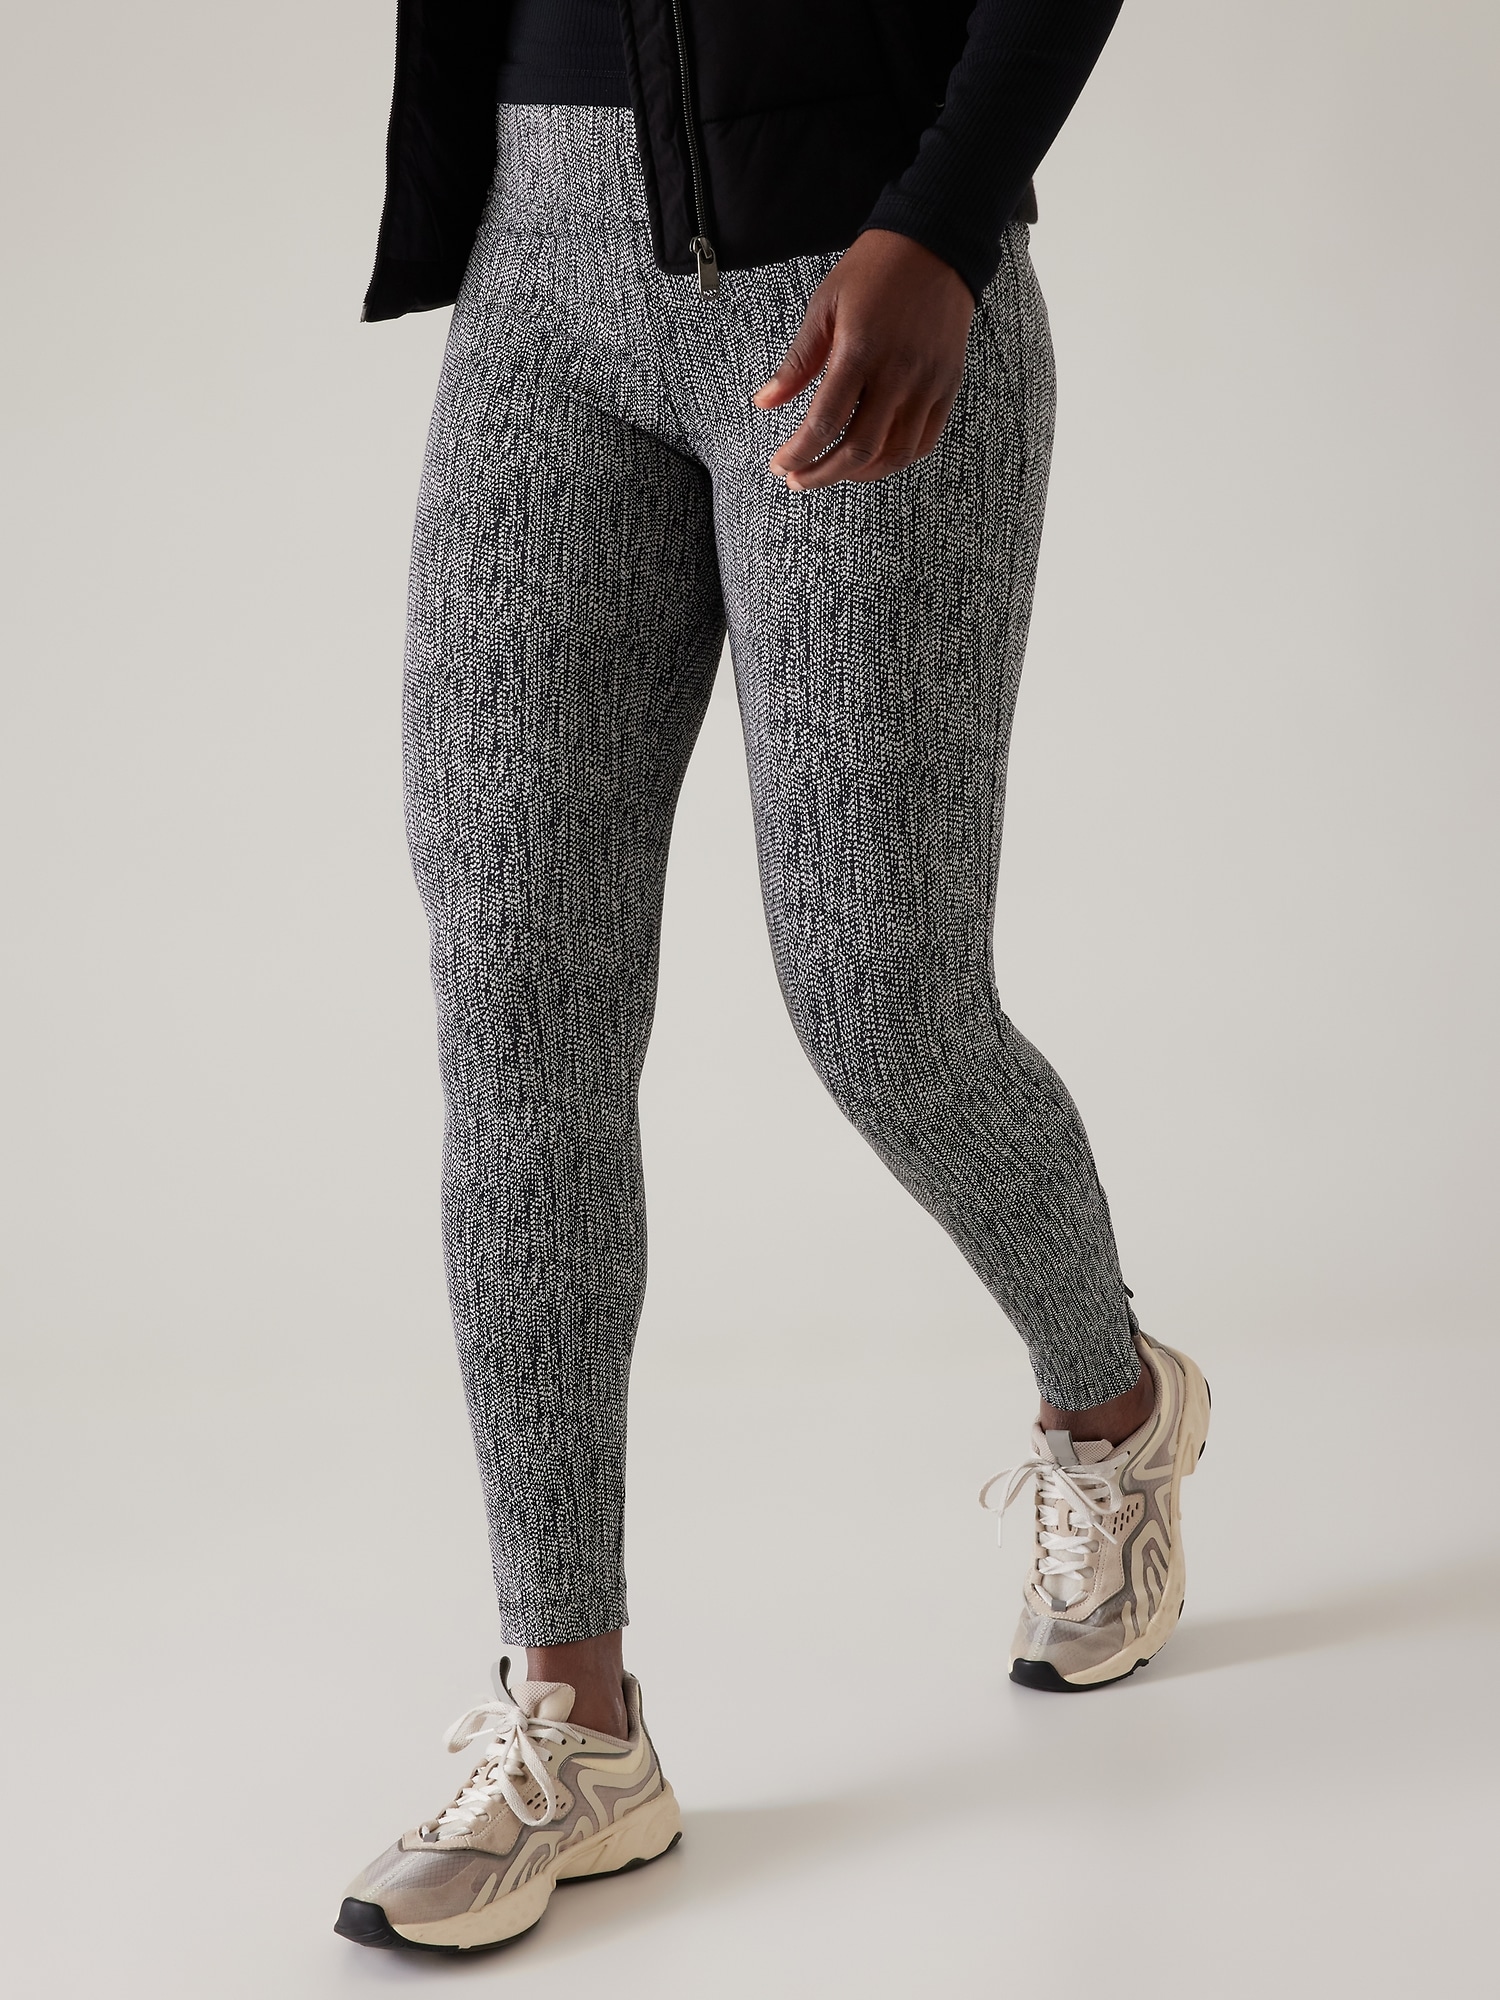 Athleta High Rise Mesh Chat Leggings Athletic Gray Size Small S EUC L1788 -  $30 - From Laura